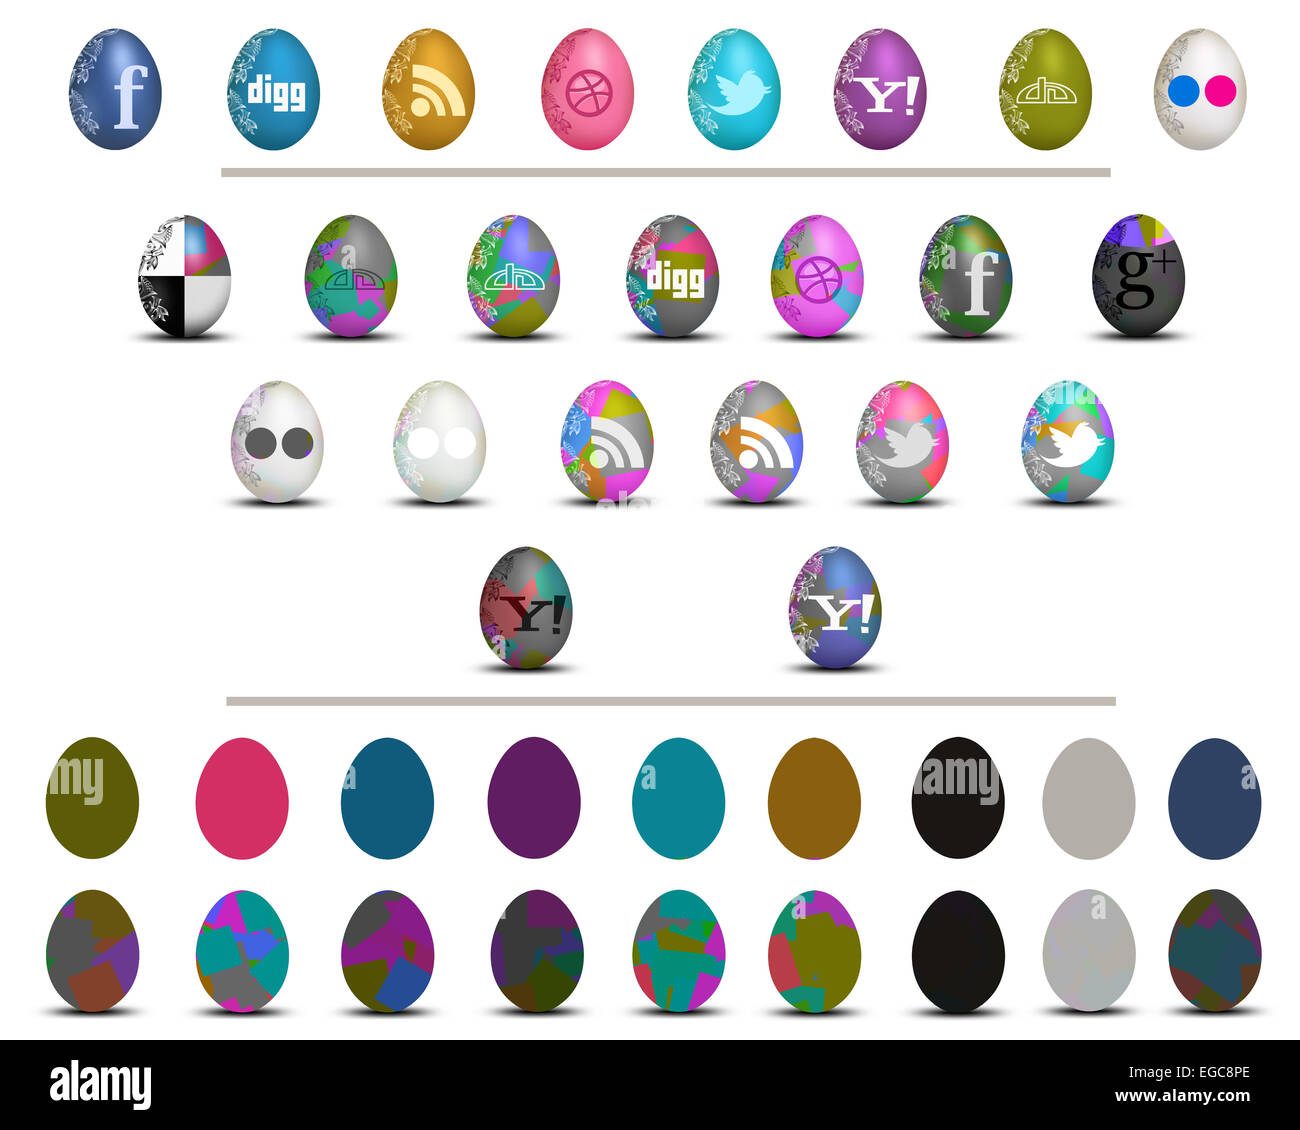 Colorful social media Easter eggs icon set isolated on white Stock Photo